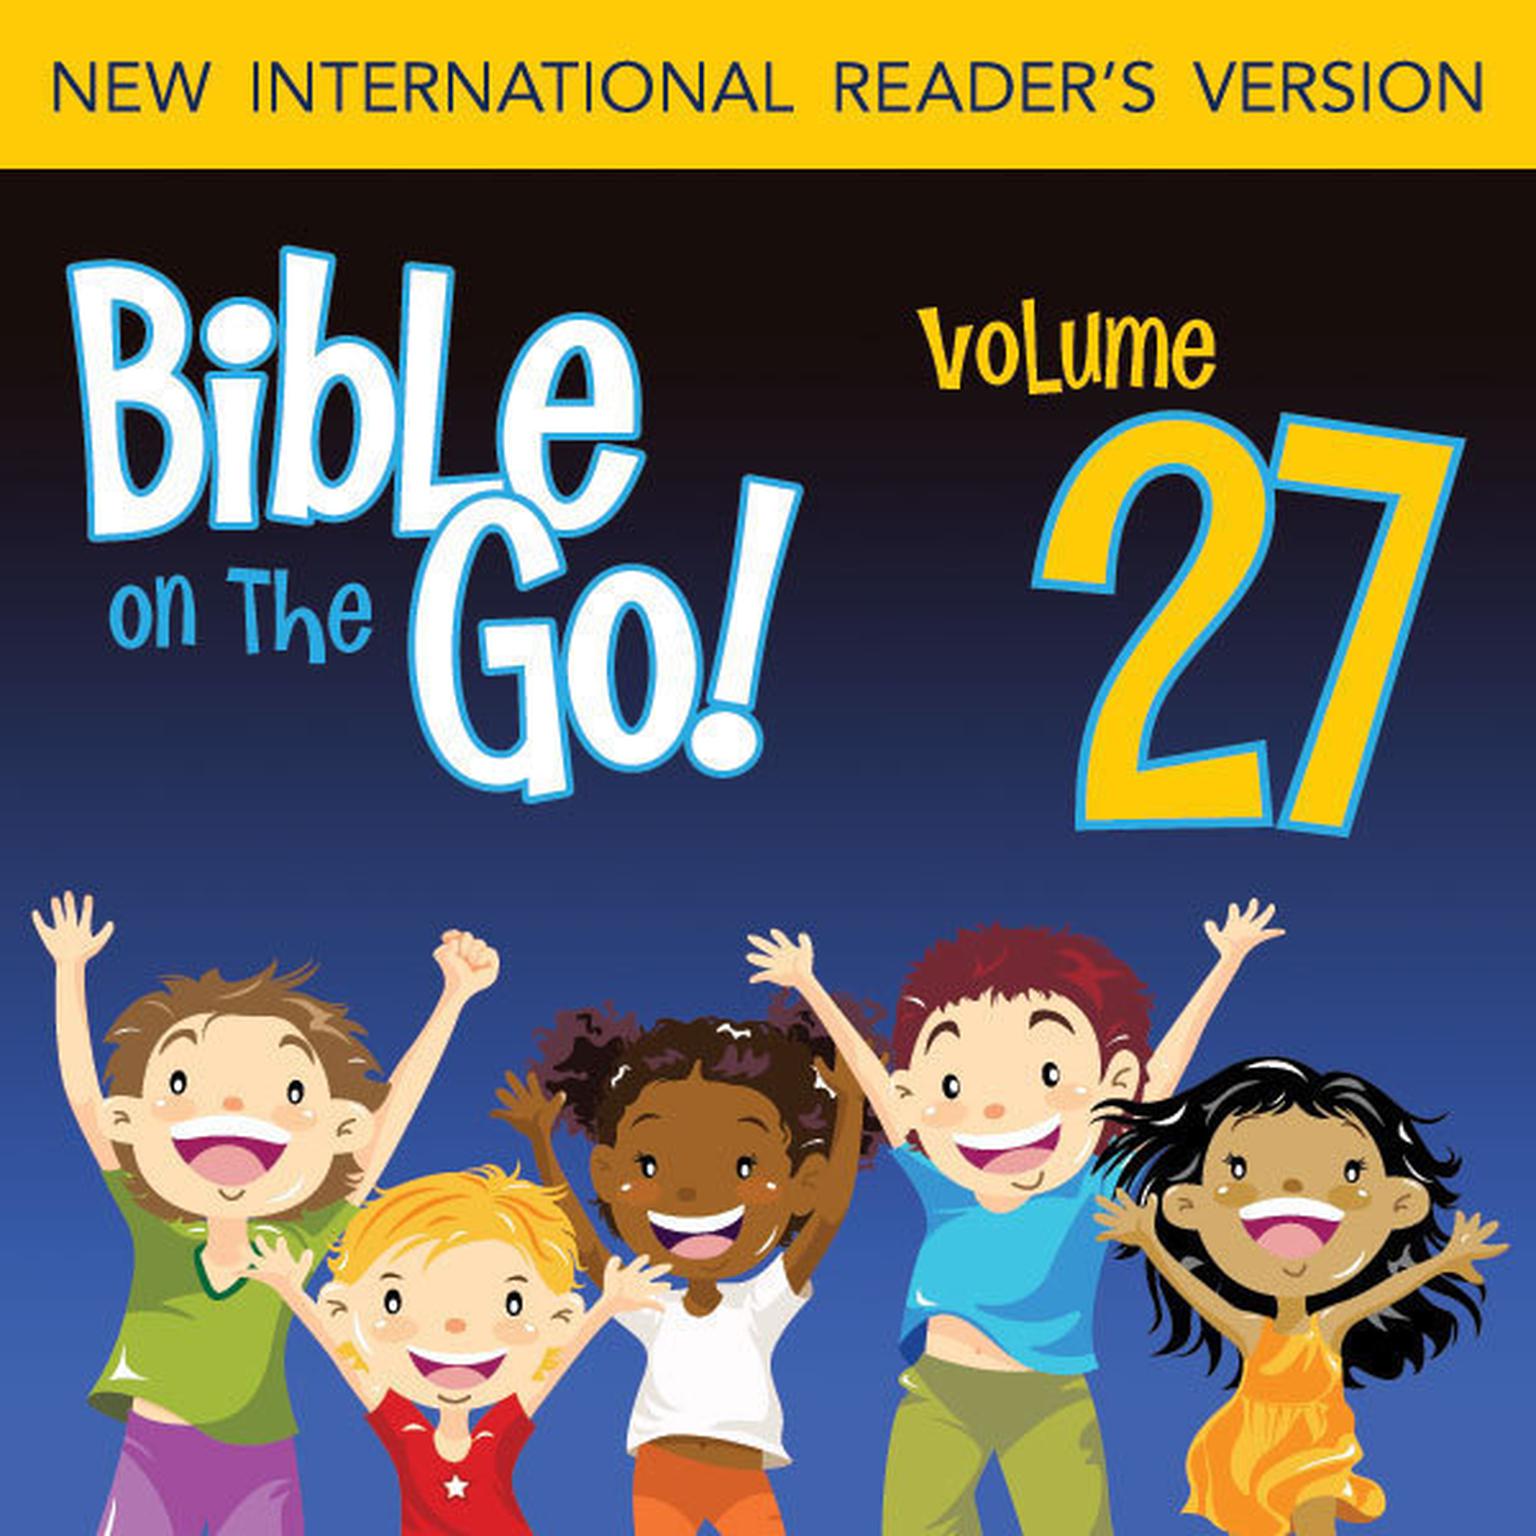 Bible on the Go Audio Bible - New International Readers Version, NIrV: Vol. 27 Psalm 93, 1, 23, 37, 101, 119: Psalm 93, 1, 23, 37, 101, 119 Audiobook, by Zondervan